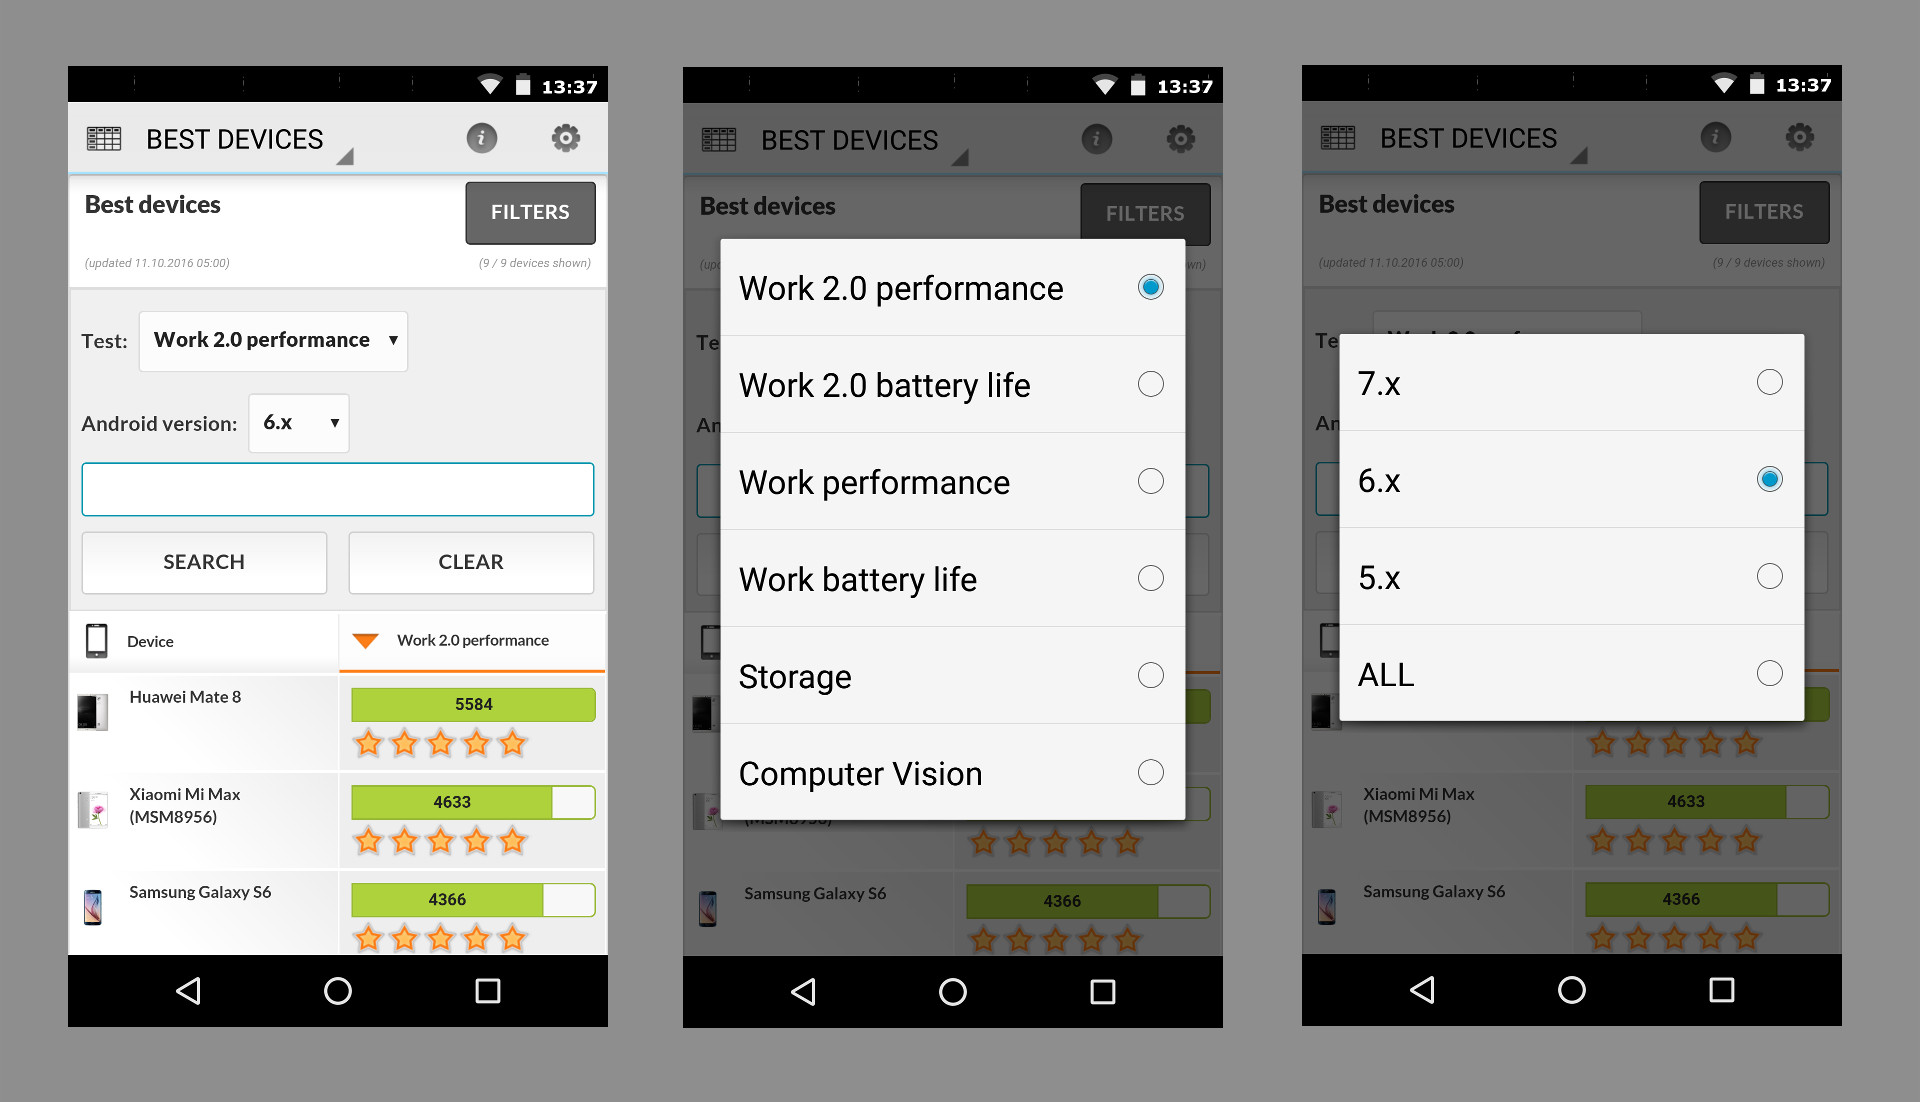 PCMark for Android performance comparison by Android OS version in the Best Devices List